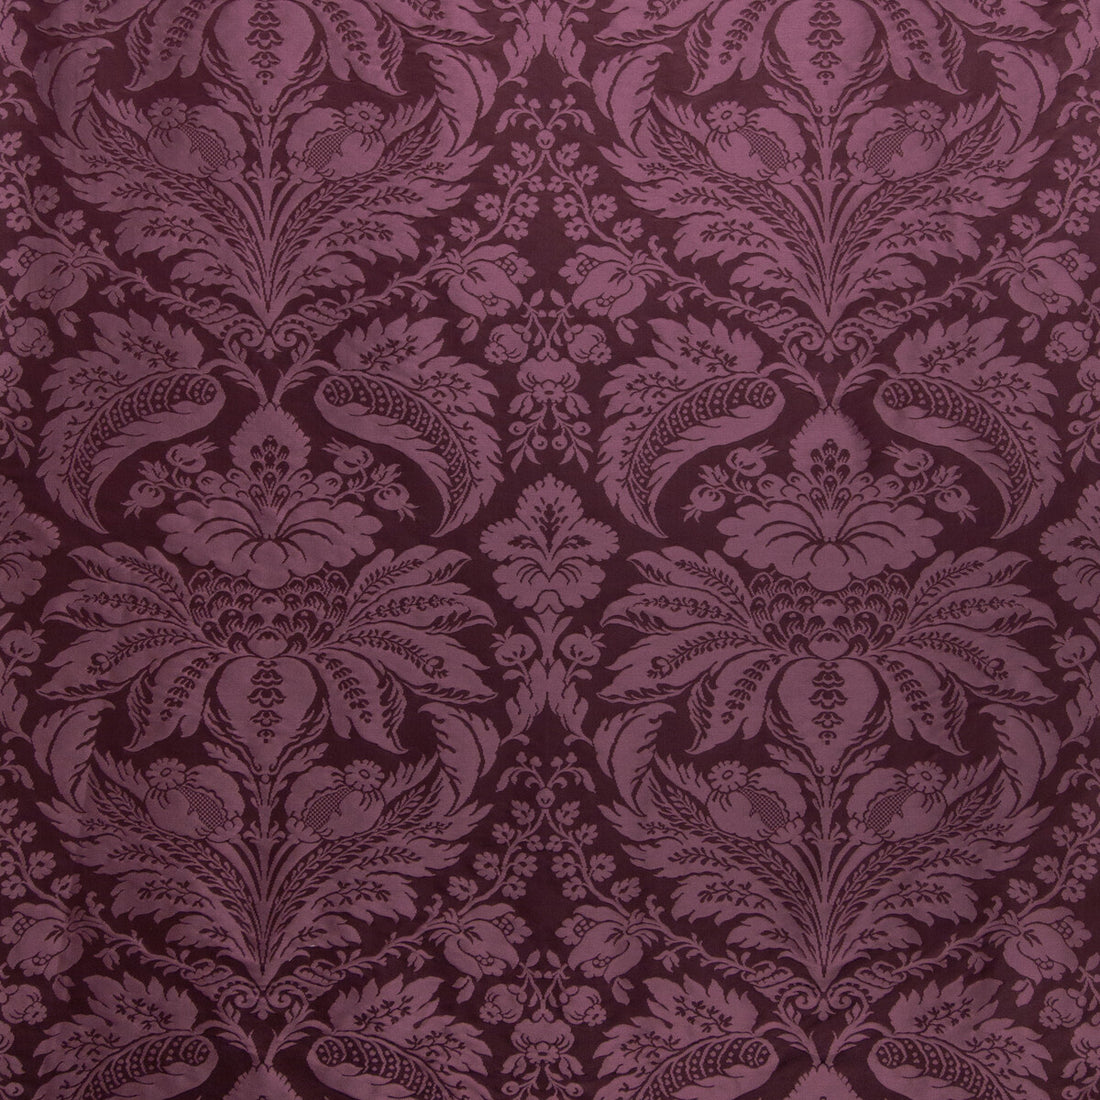 Damask Pierre fabric in eggplant color - pattern 8013188.909.0 - by Brunschwig &amp; Fils in the B&amp;F Showroom Exclusive 2019 collection